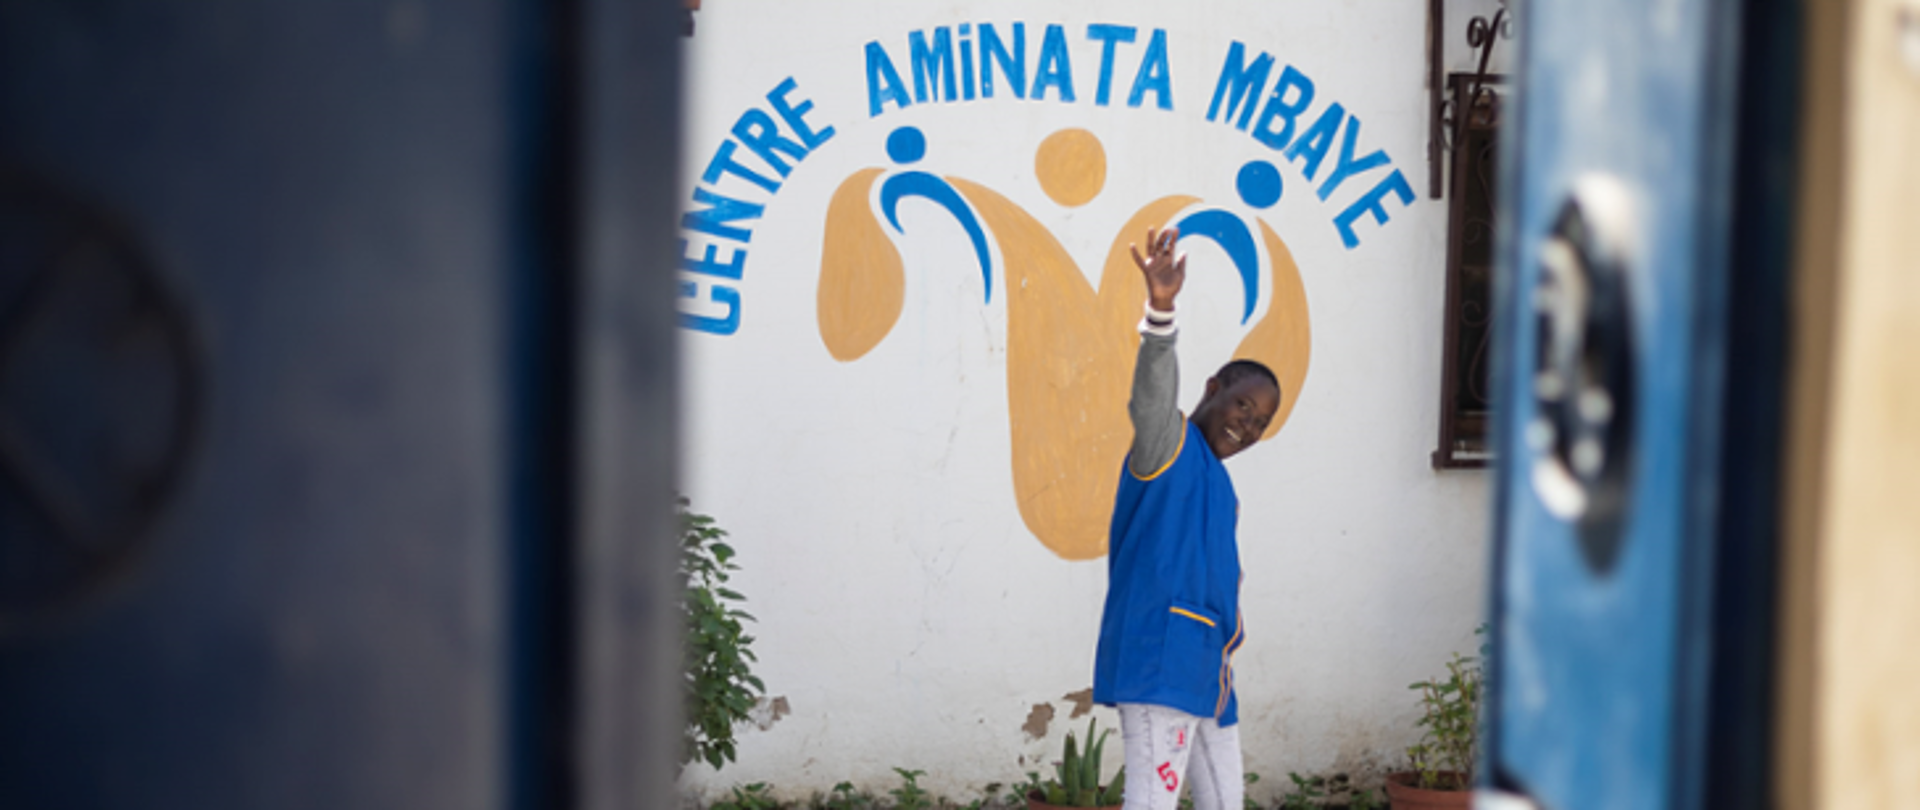 Improvement of the opportunities to support the social integration of children and young people with mental disabilities at the Aminata Mbaye Center